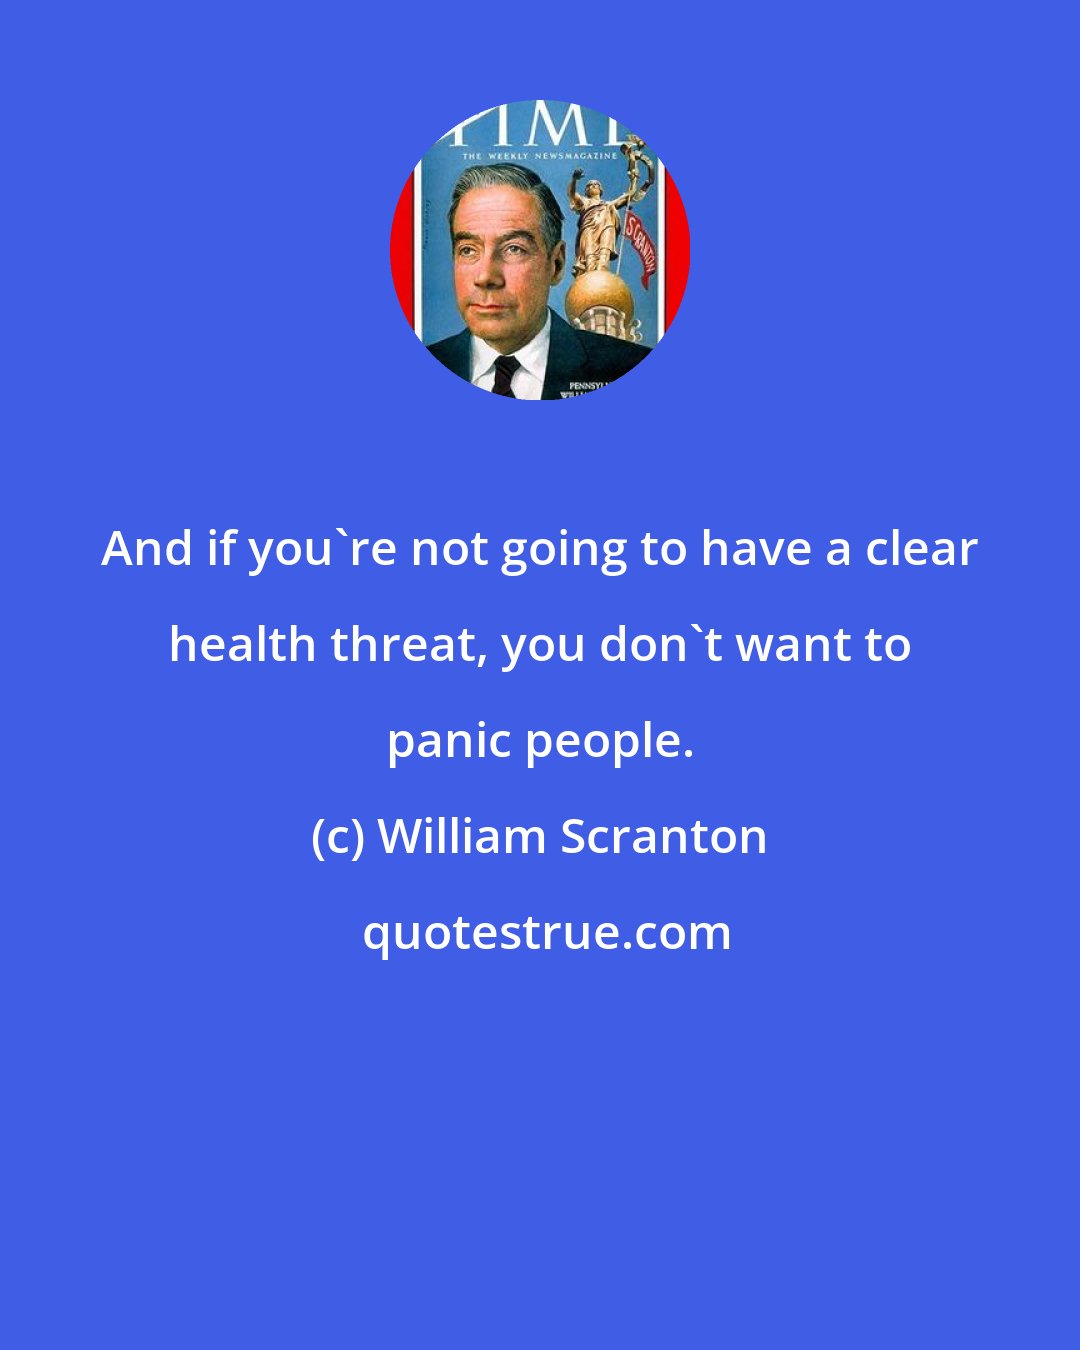 William Scranton: And if you're not going to have a clear health threat, you don't want to panic people.